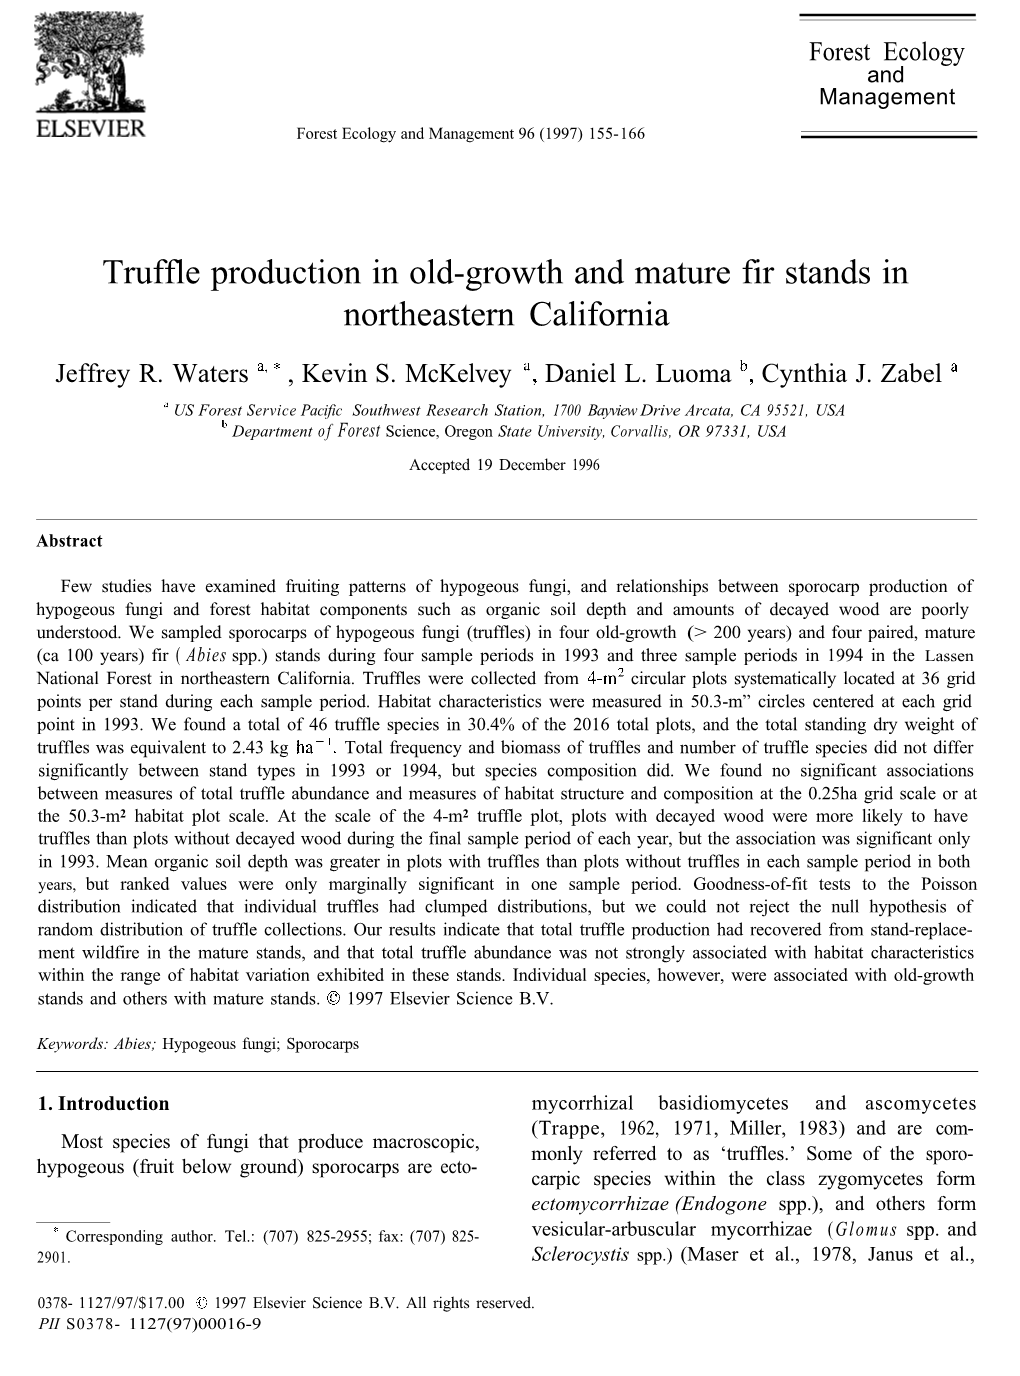 Truffle Production in Old-Growth and Mature Fir Stands in Northeastern California